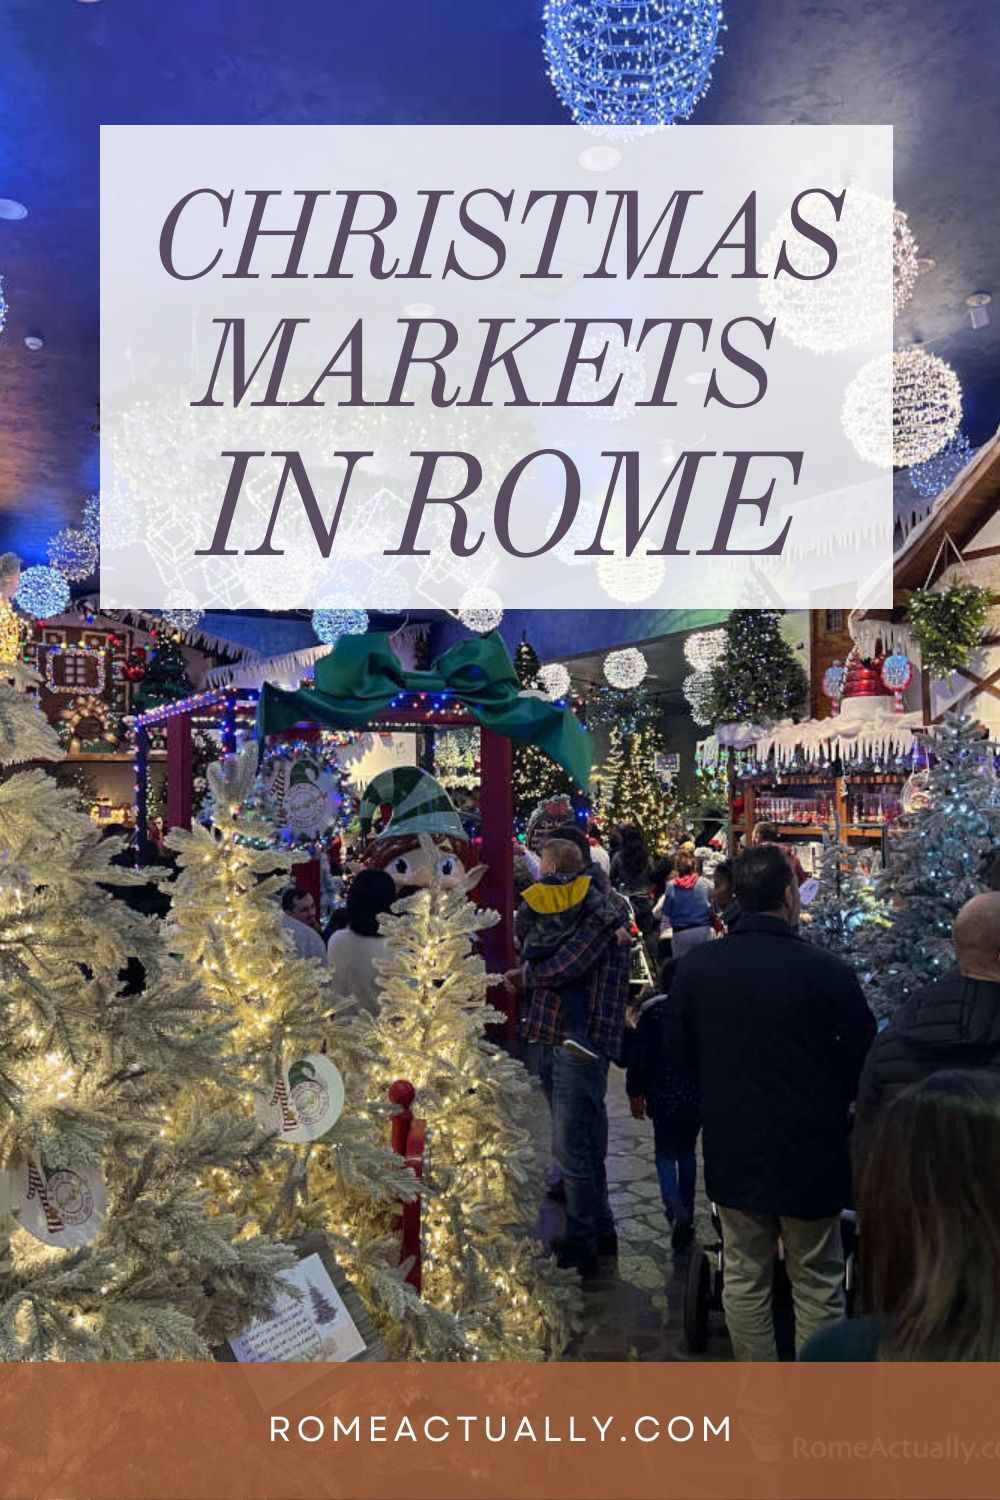 Pinterest image with a photo from Rome and a caption reading "Christmas markets in Rome".